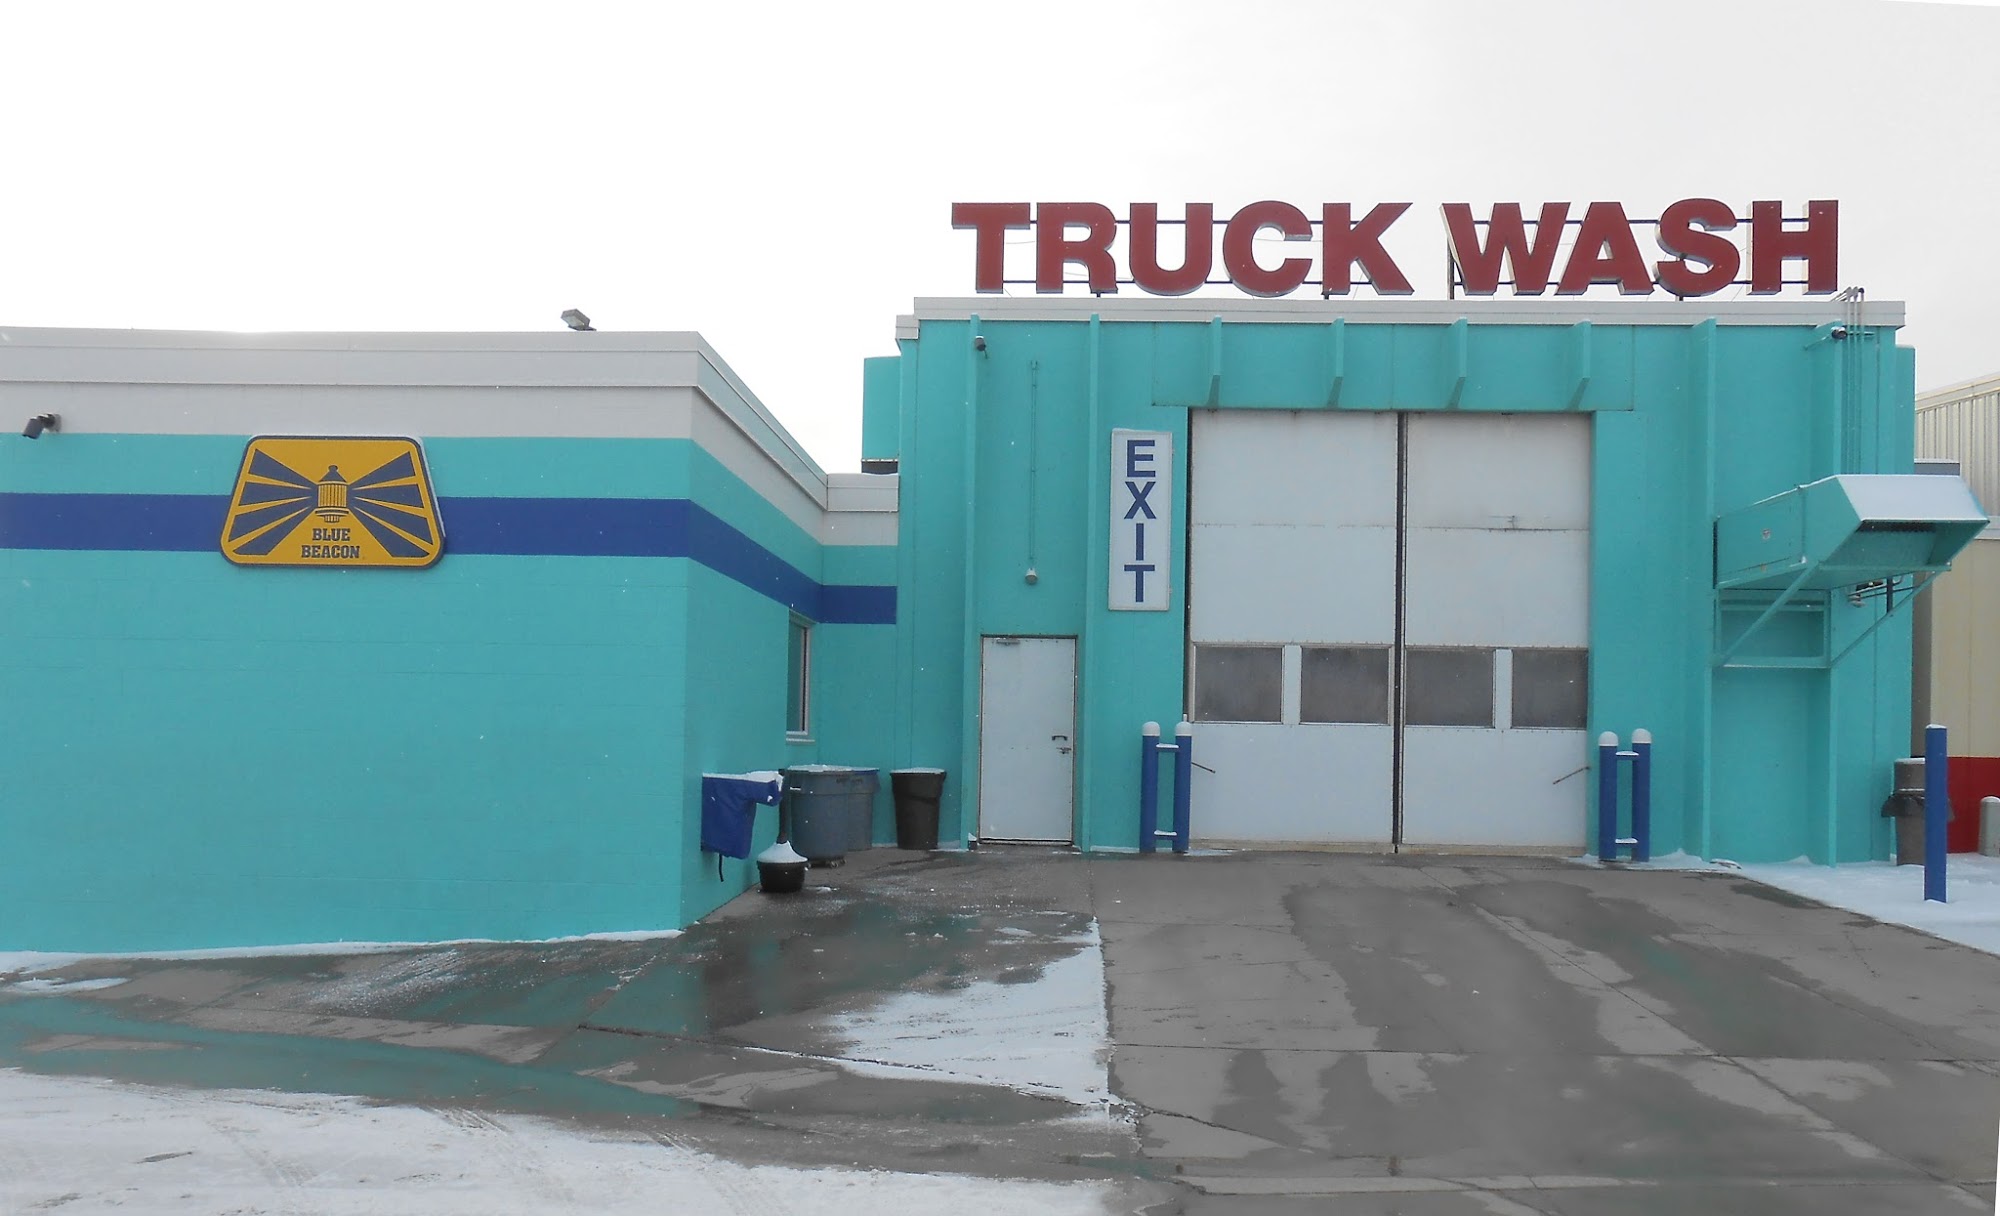 Blue Beacon Truck Wash of Minot, ND